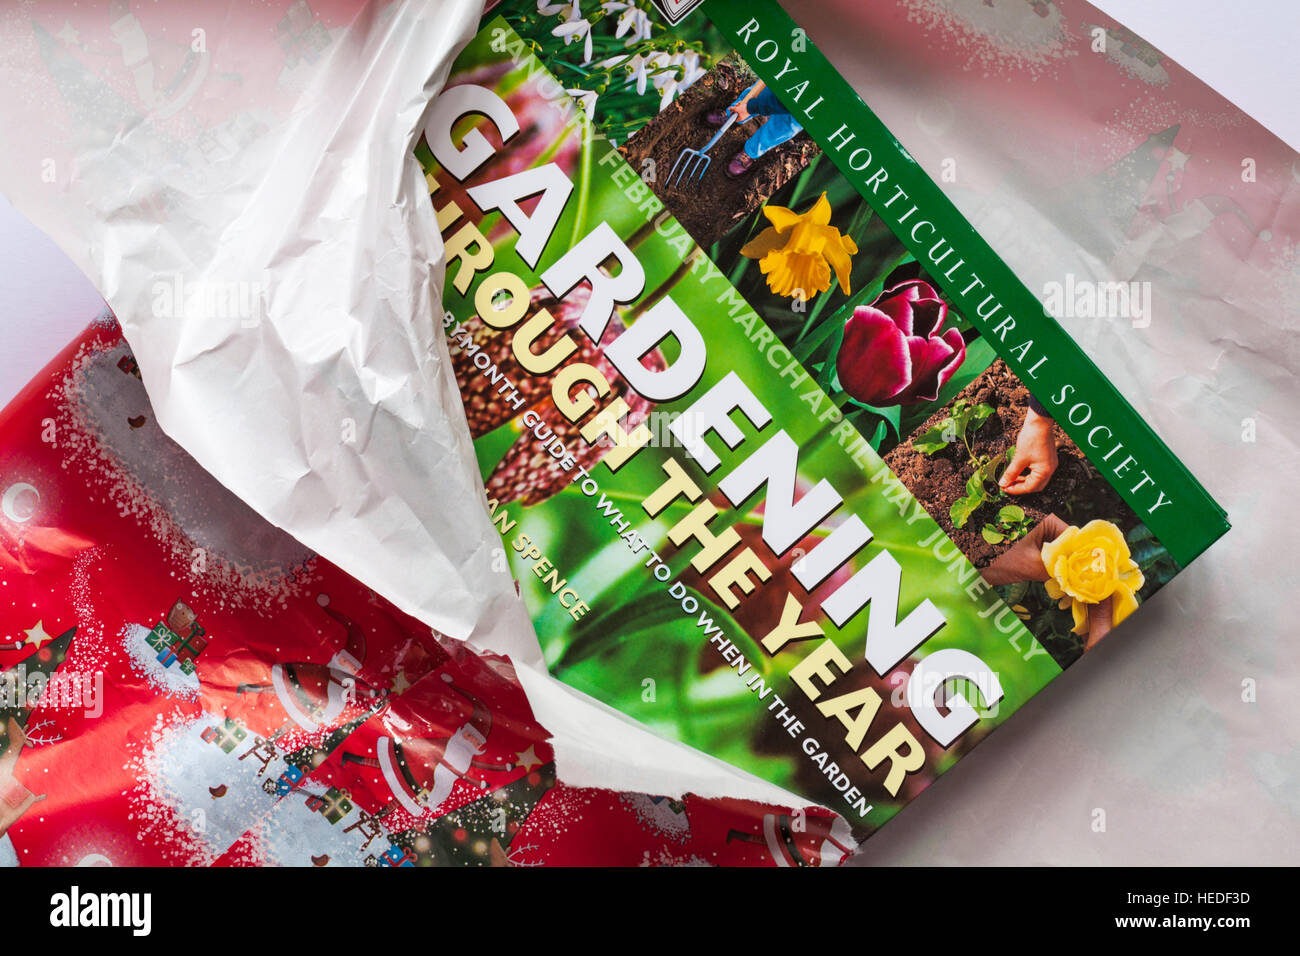 Unwrapping garden Christmas present - Royal Horticultural Society gardening through the year book Stock Photo